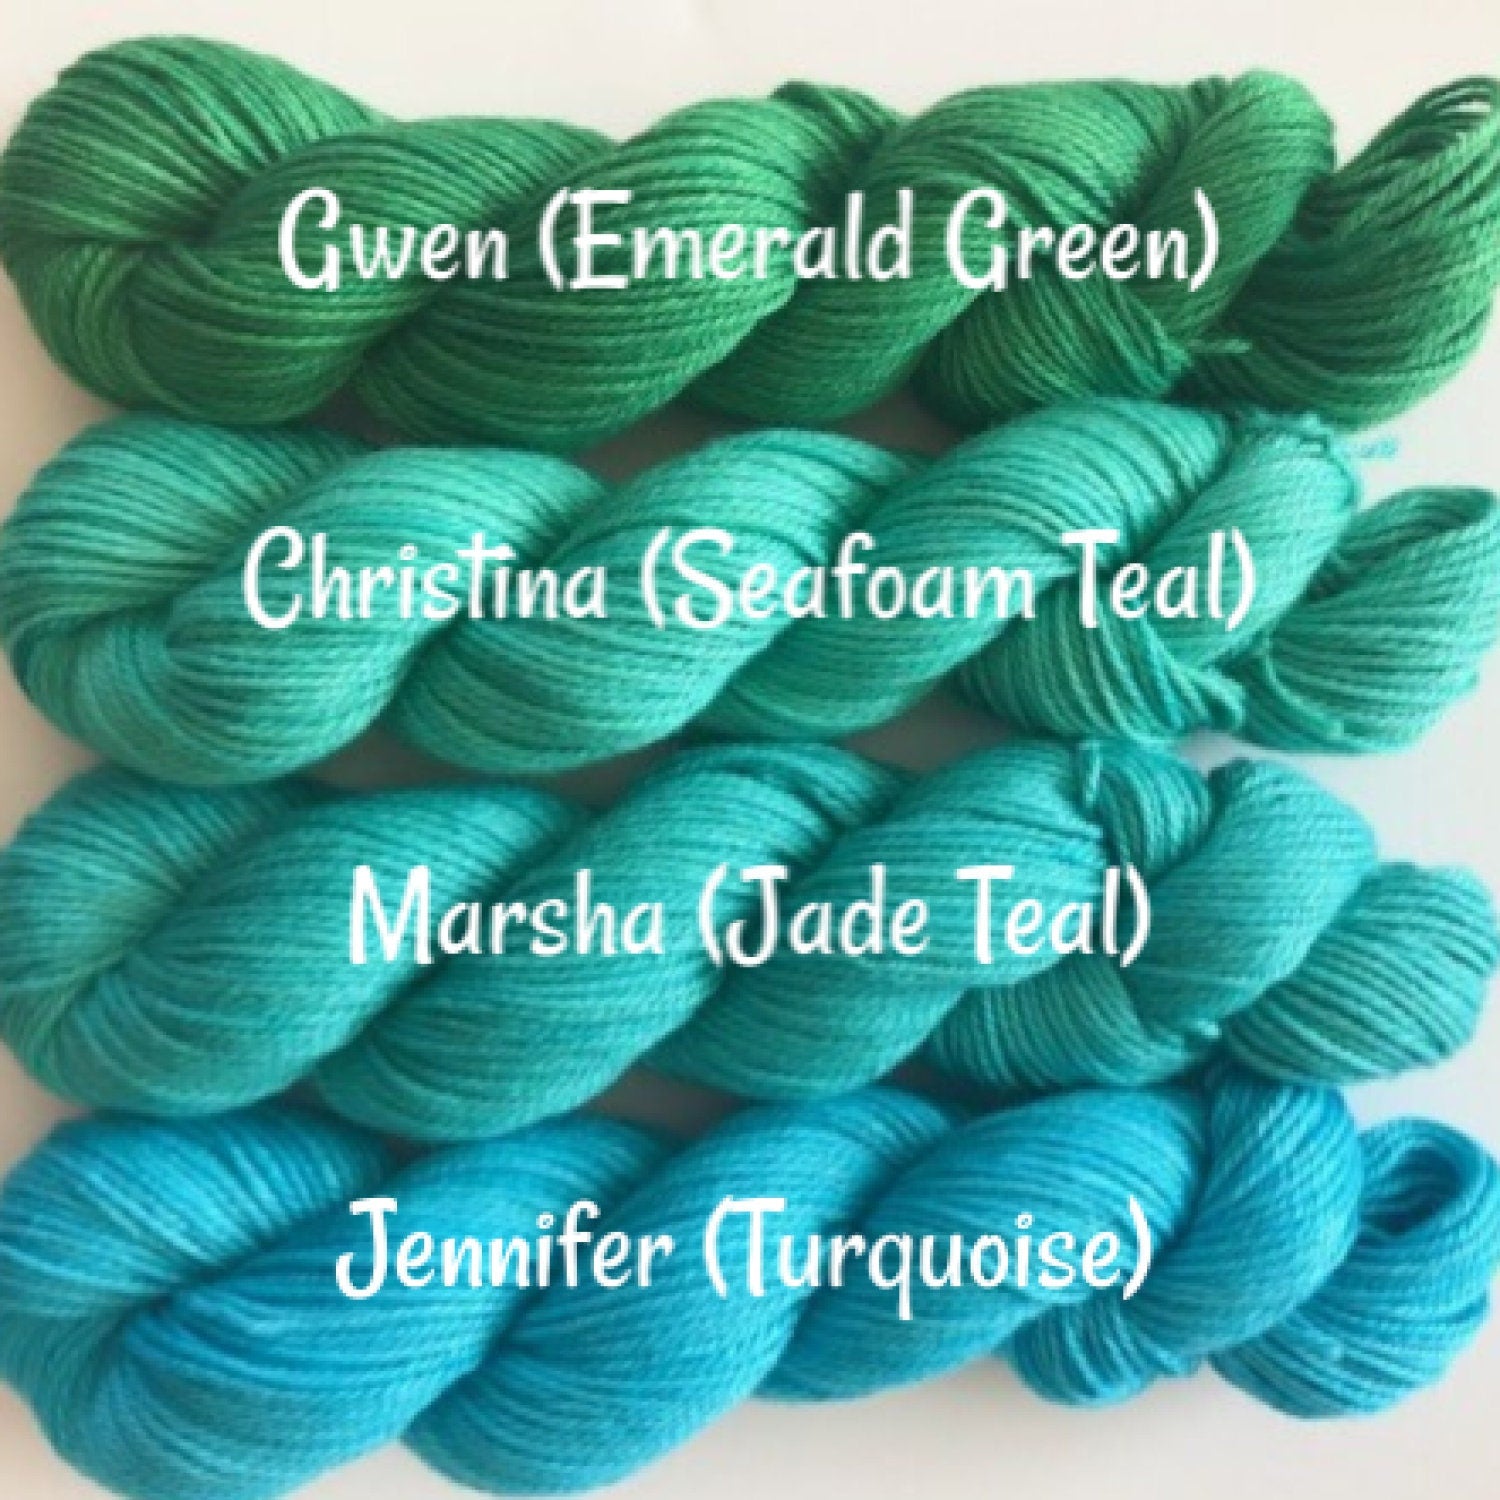 Vegan Gradient Yarn Kit - Hand Dyed Bamboo Cotton - Fingering / Sock Weight - Yellow Green Teal Turquoise Semi Solid - 3 Ply Knitting Thread